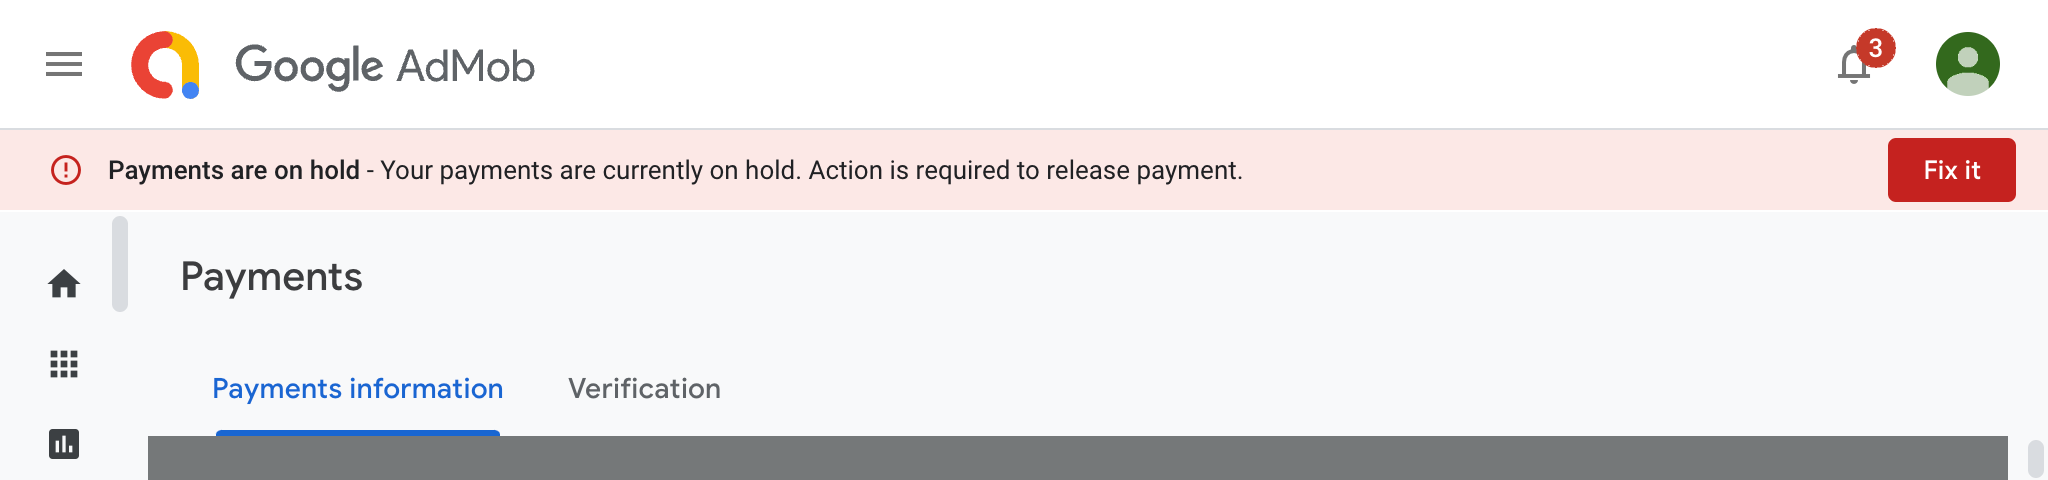 Google Admob console - Payments on hold alert